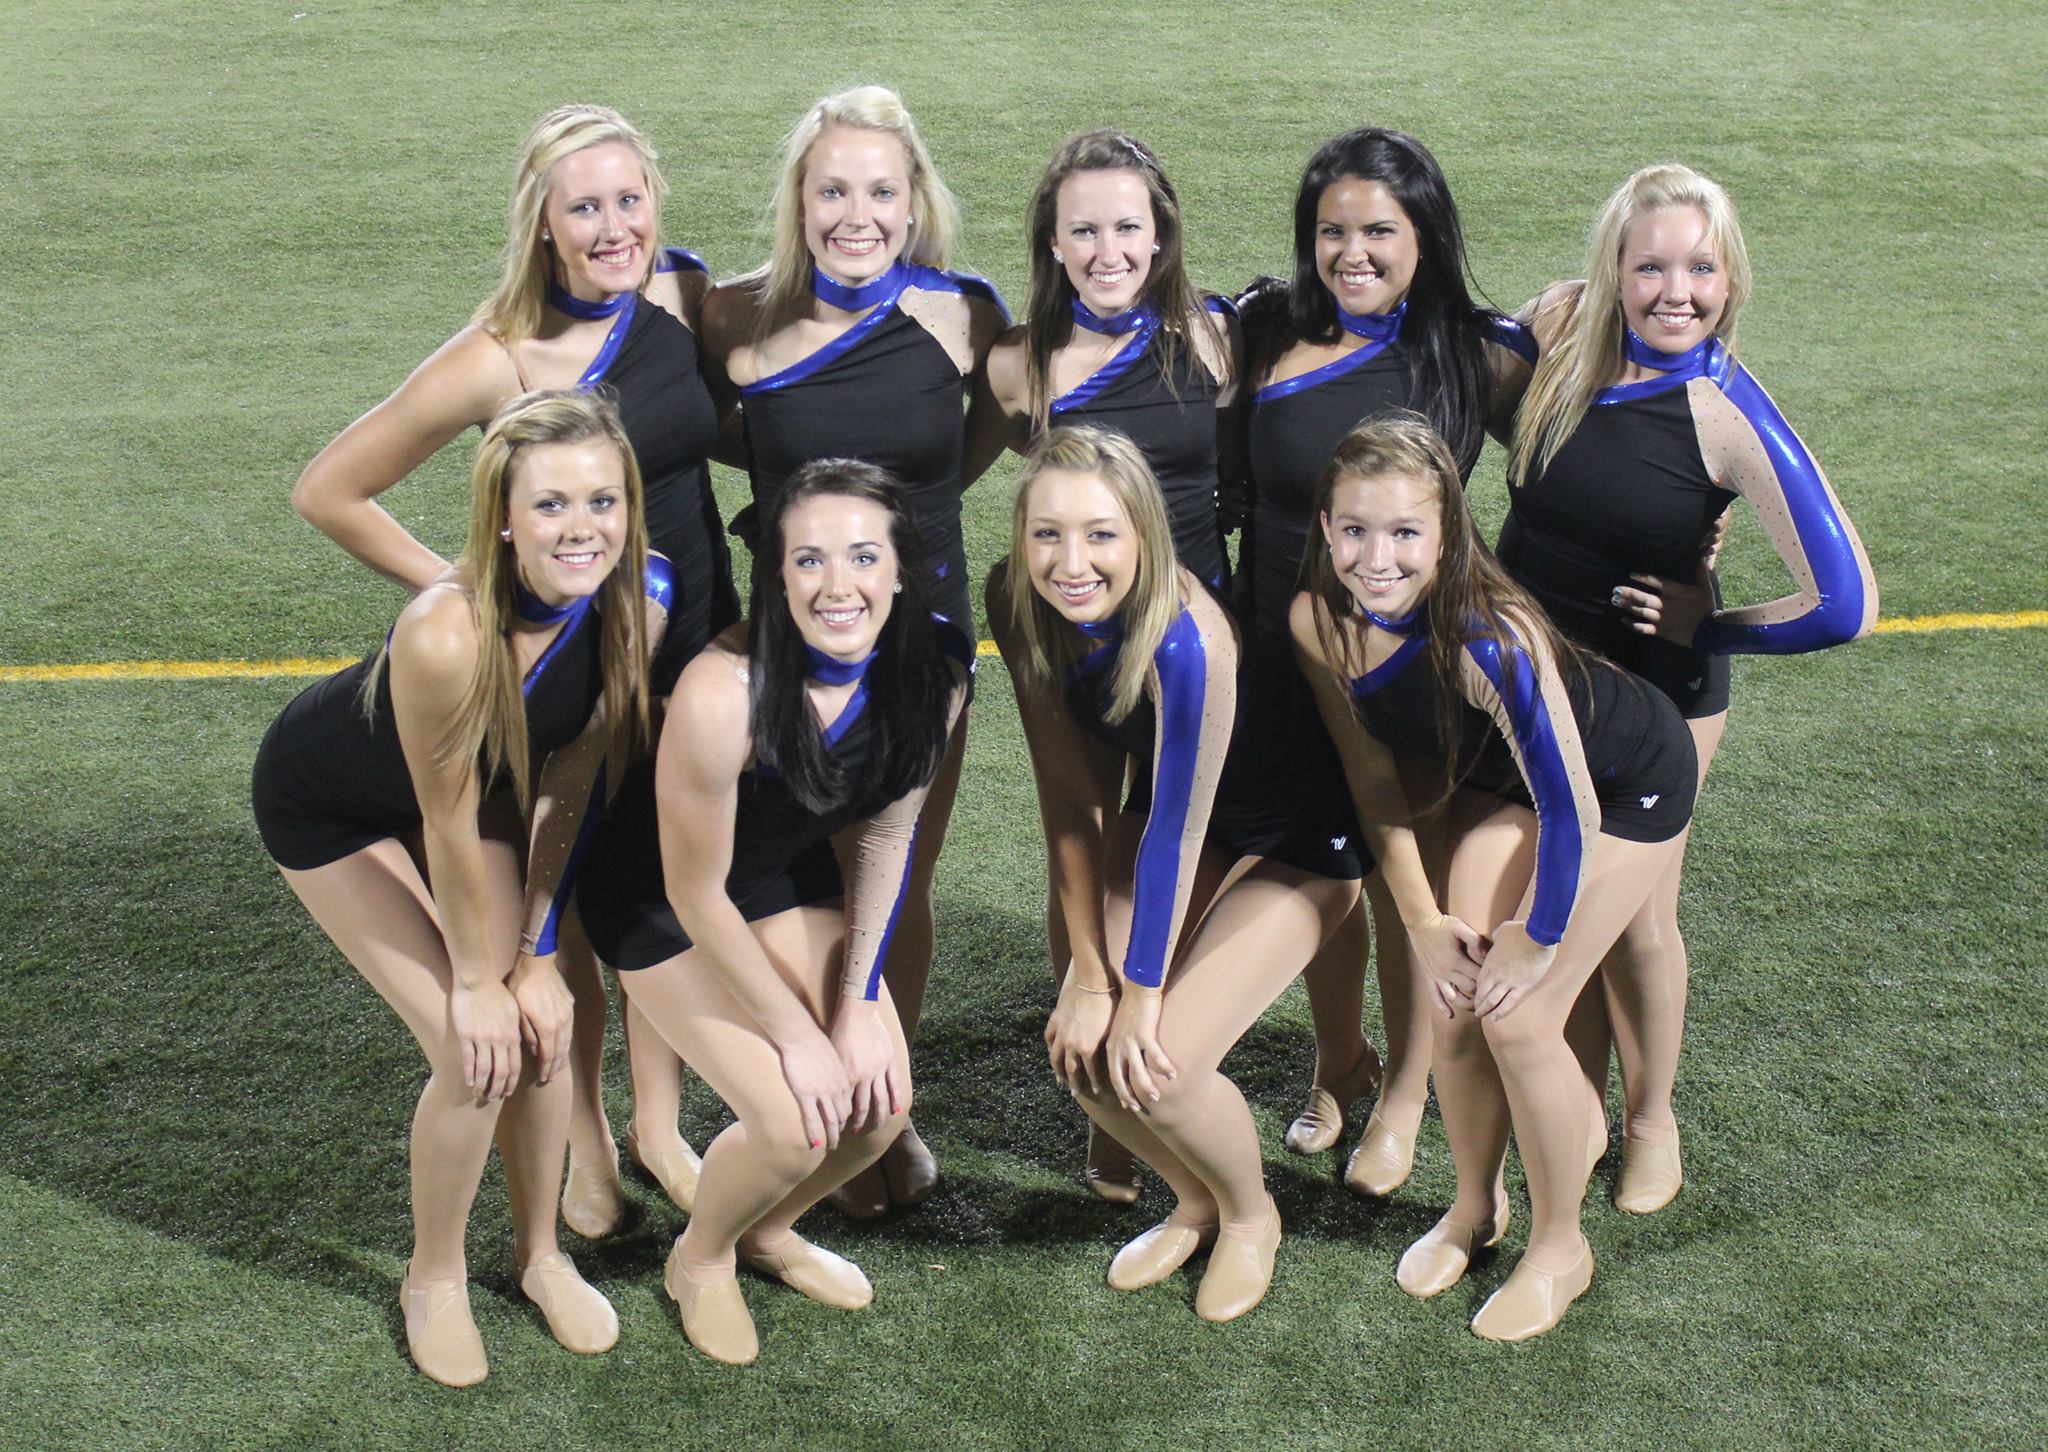 UNK Spirit Squad leads Jan. 24 cheer and dance camp UNK News